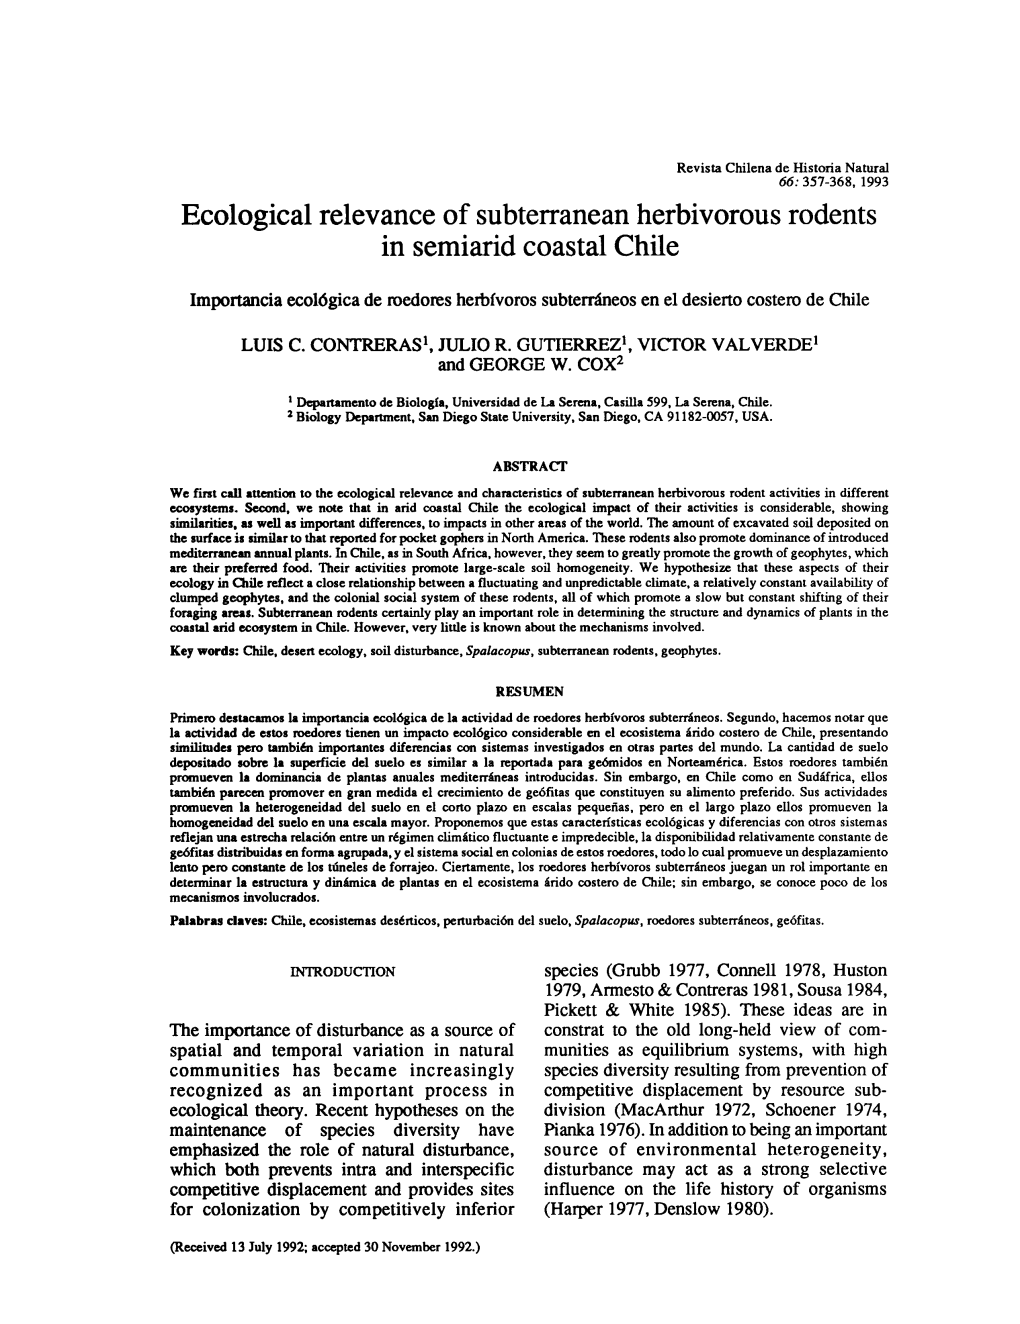 Ecological Relevance of Subterranean Herbivorous Rodents in Semiarid Coastal Chile